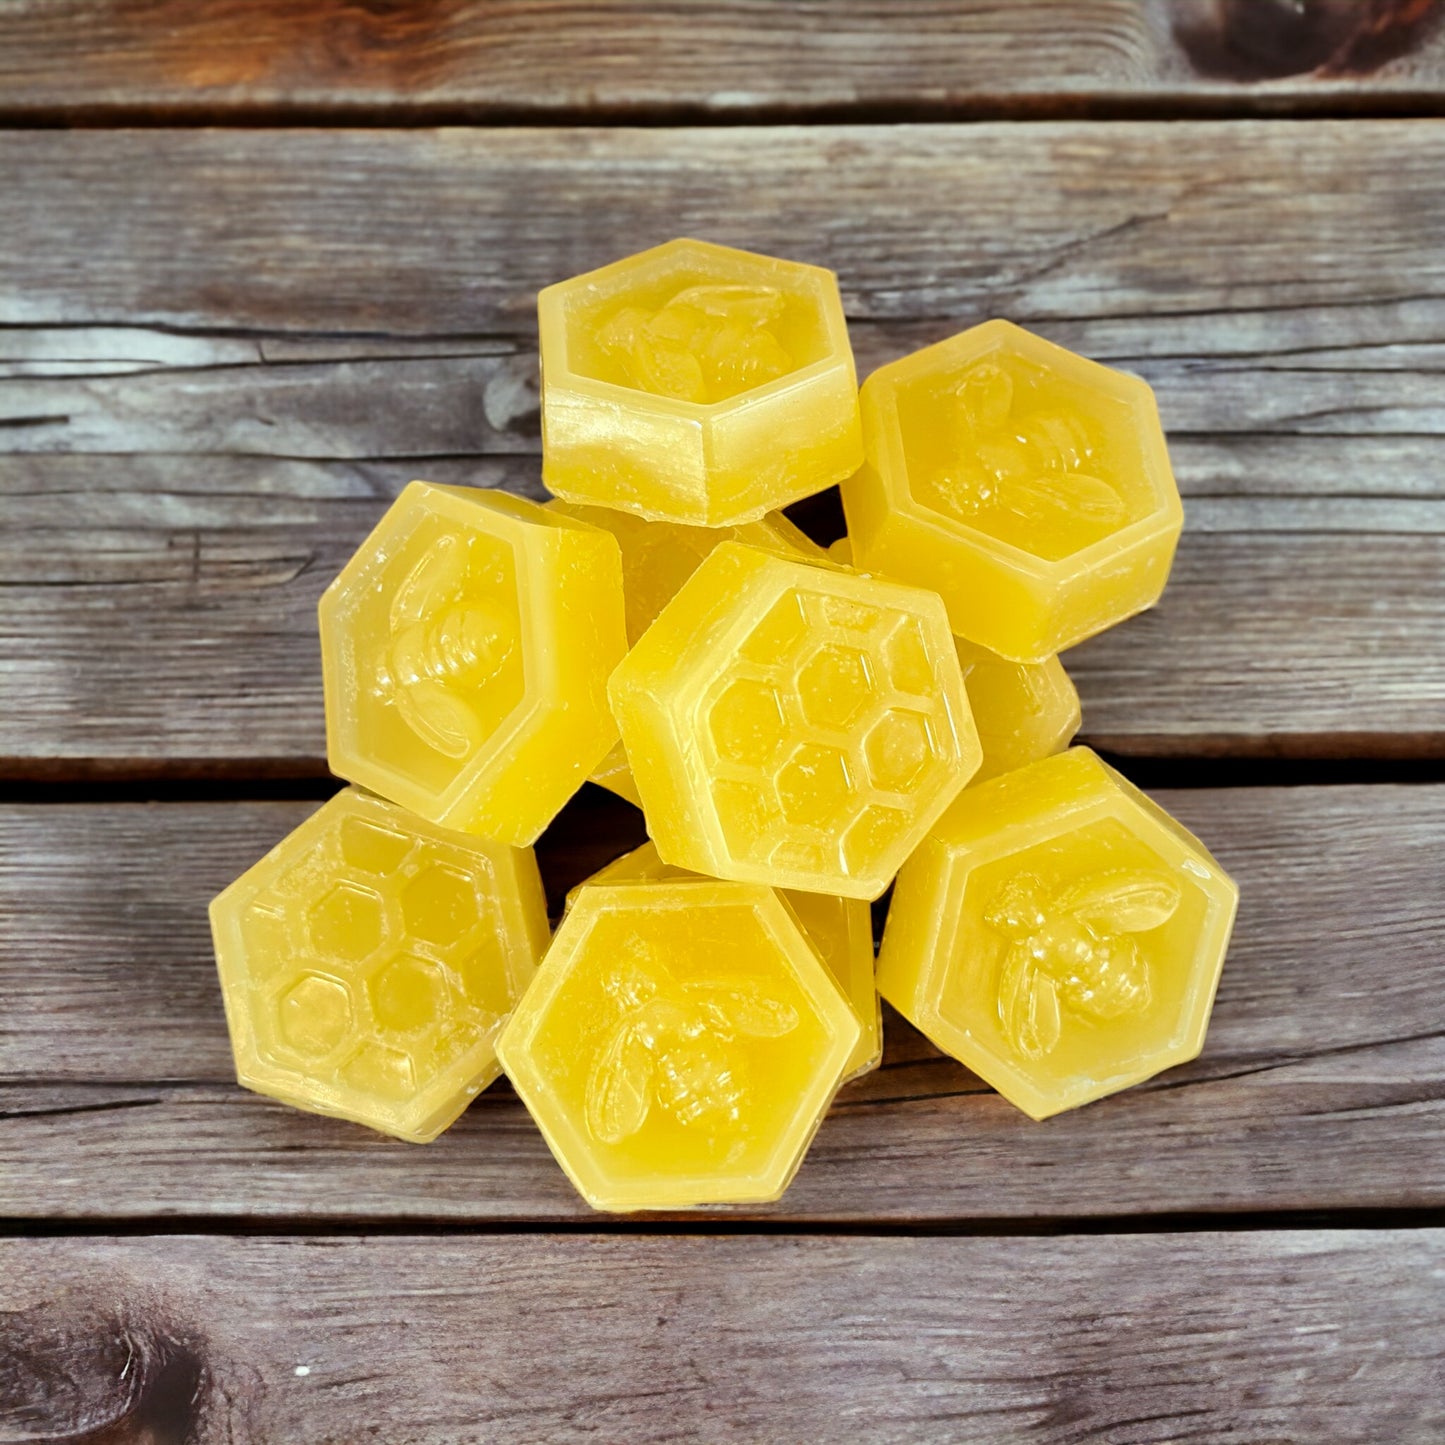 Beeswax Melts | Organic pure natural | Unscented | Wax Warmer Melter Honeycomb & Bee | Purifying Honey Scent Handcrafted Pack of 10 - Modernhousemiami